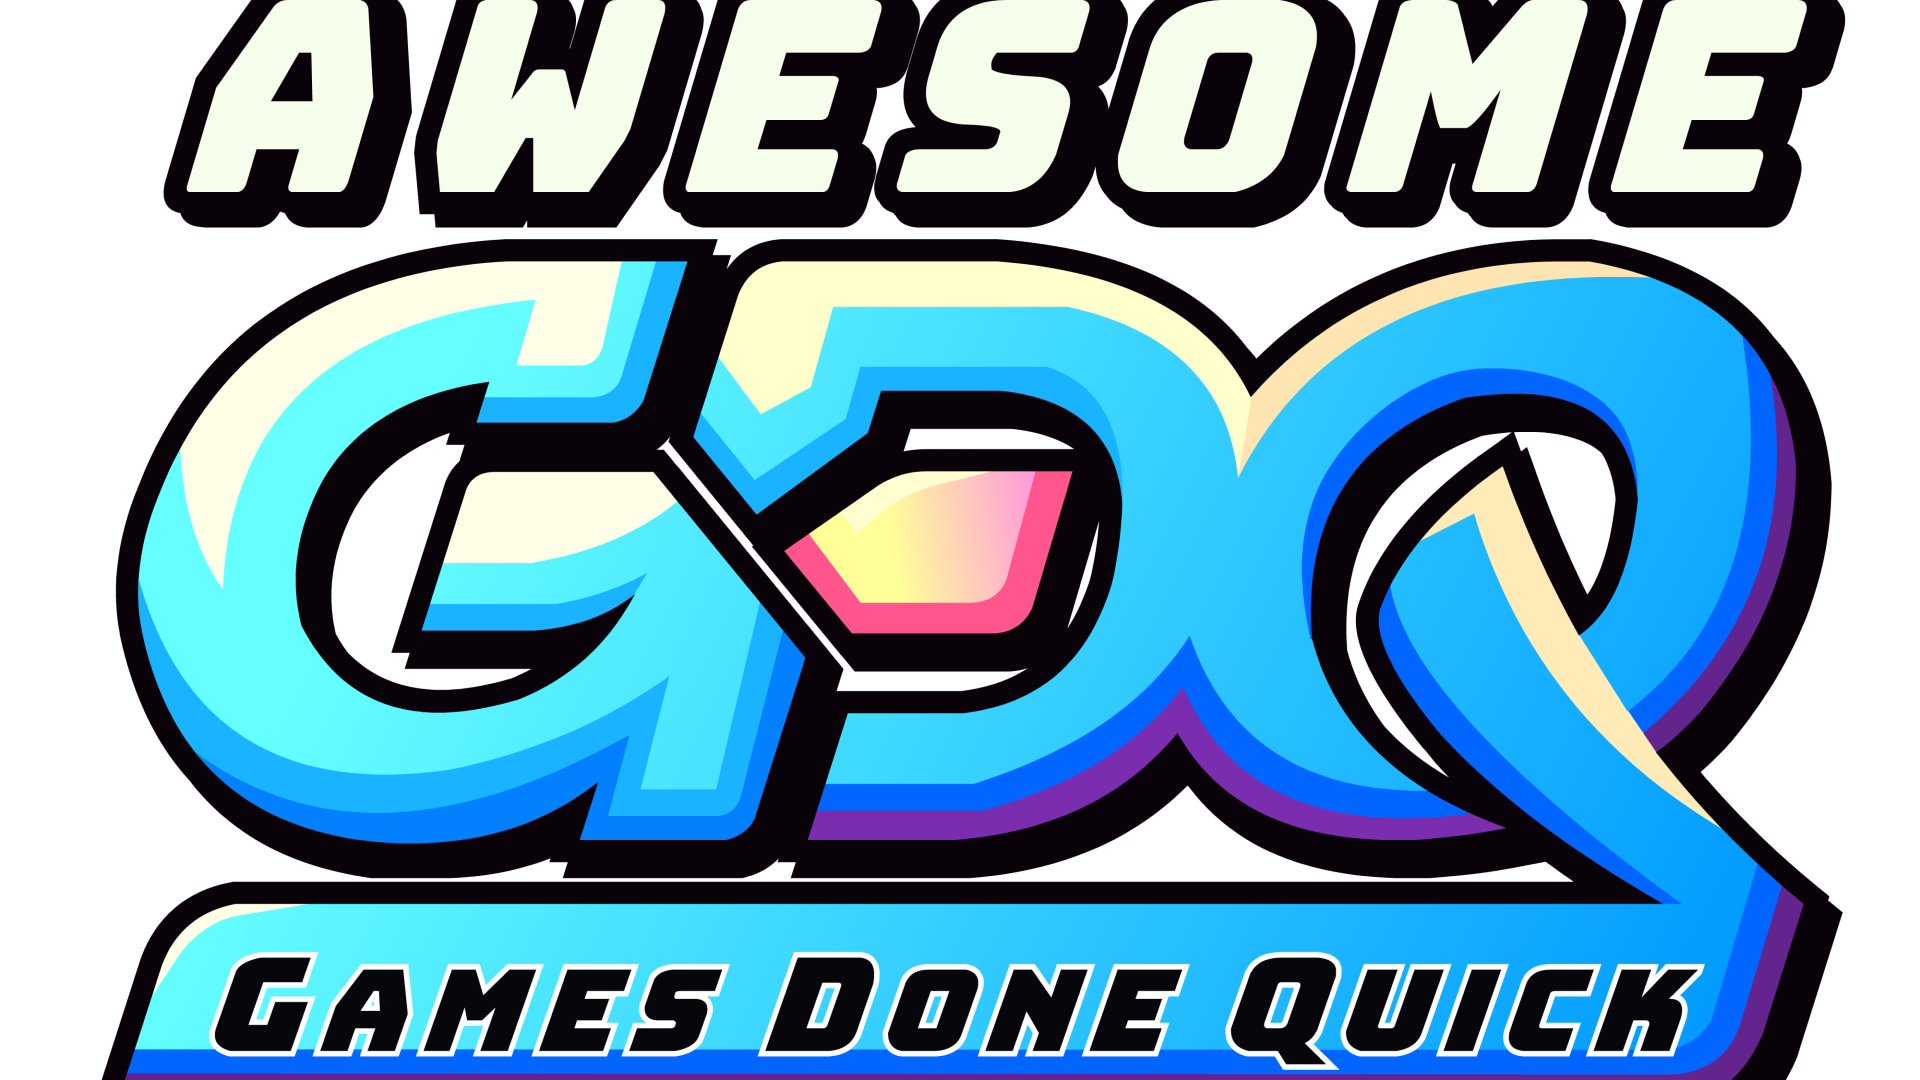 Image for Awesome Games Done Quick 2023 goes online only after Florida deemed unsafe for community